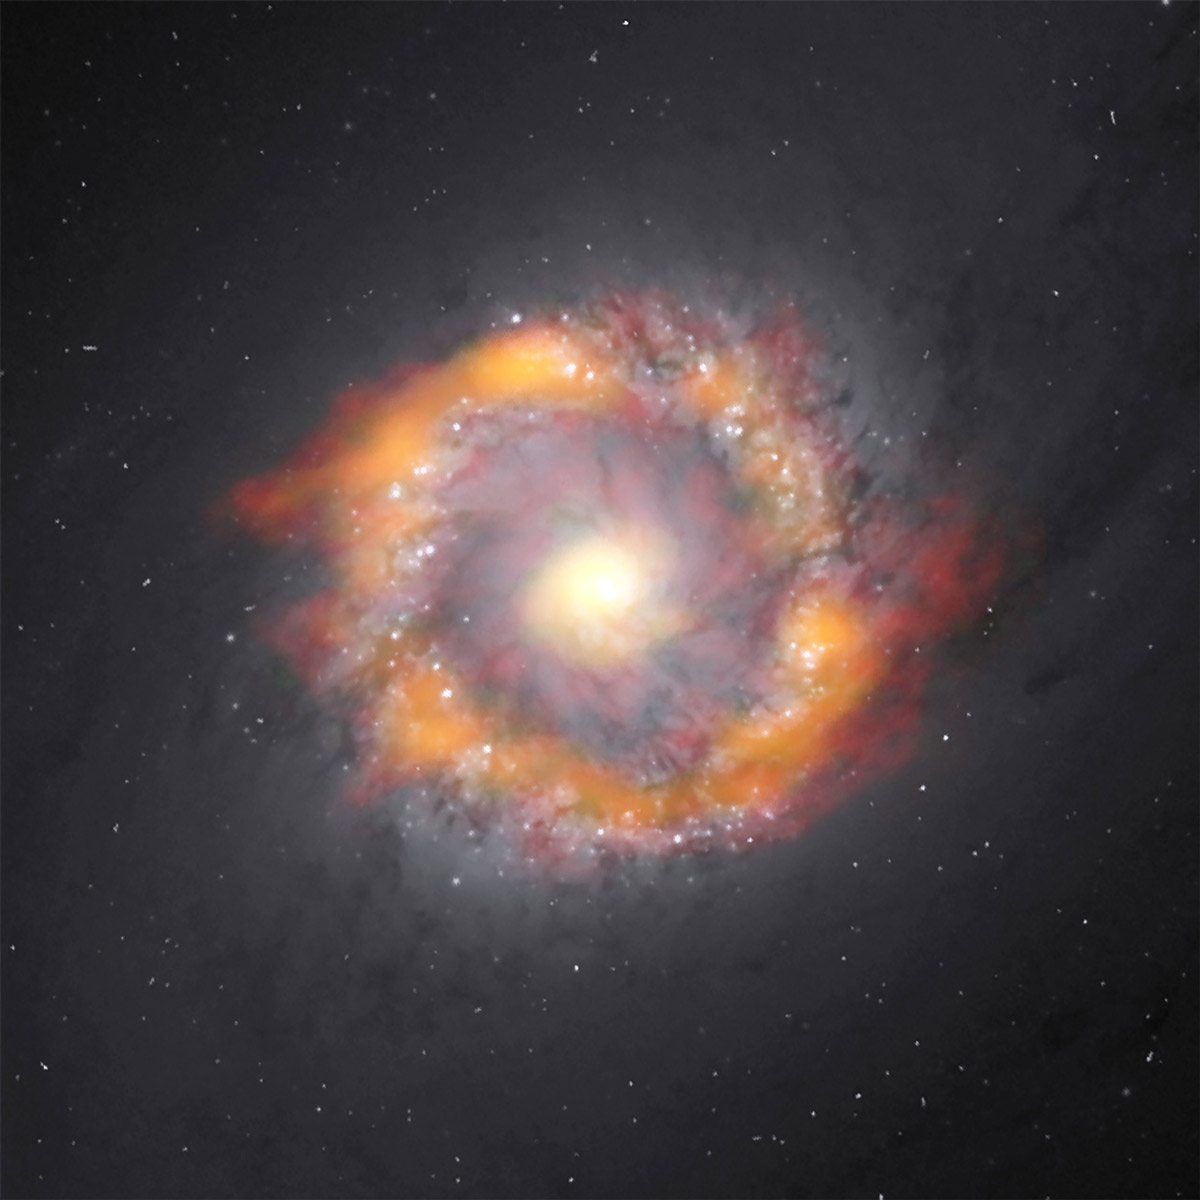 Composite image of the barred spiral galaxy NGC 1097